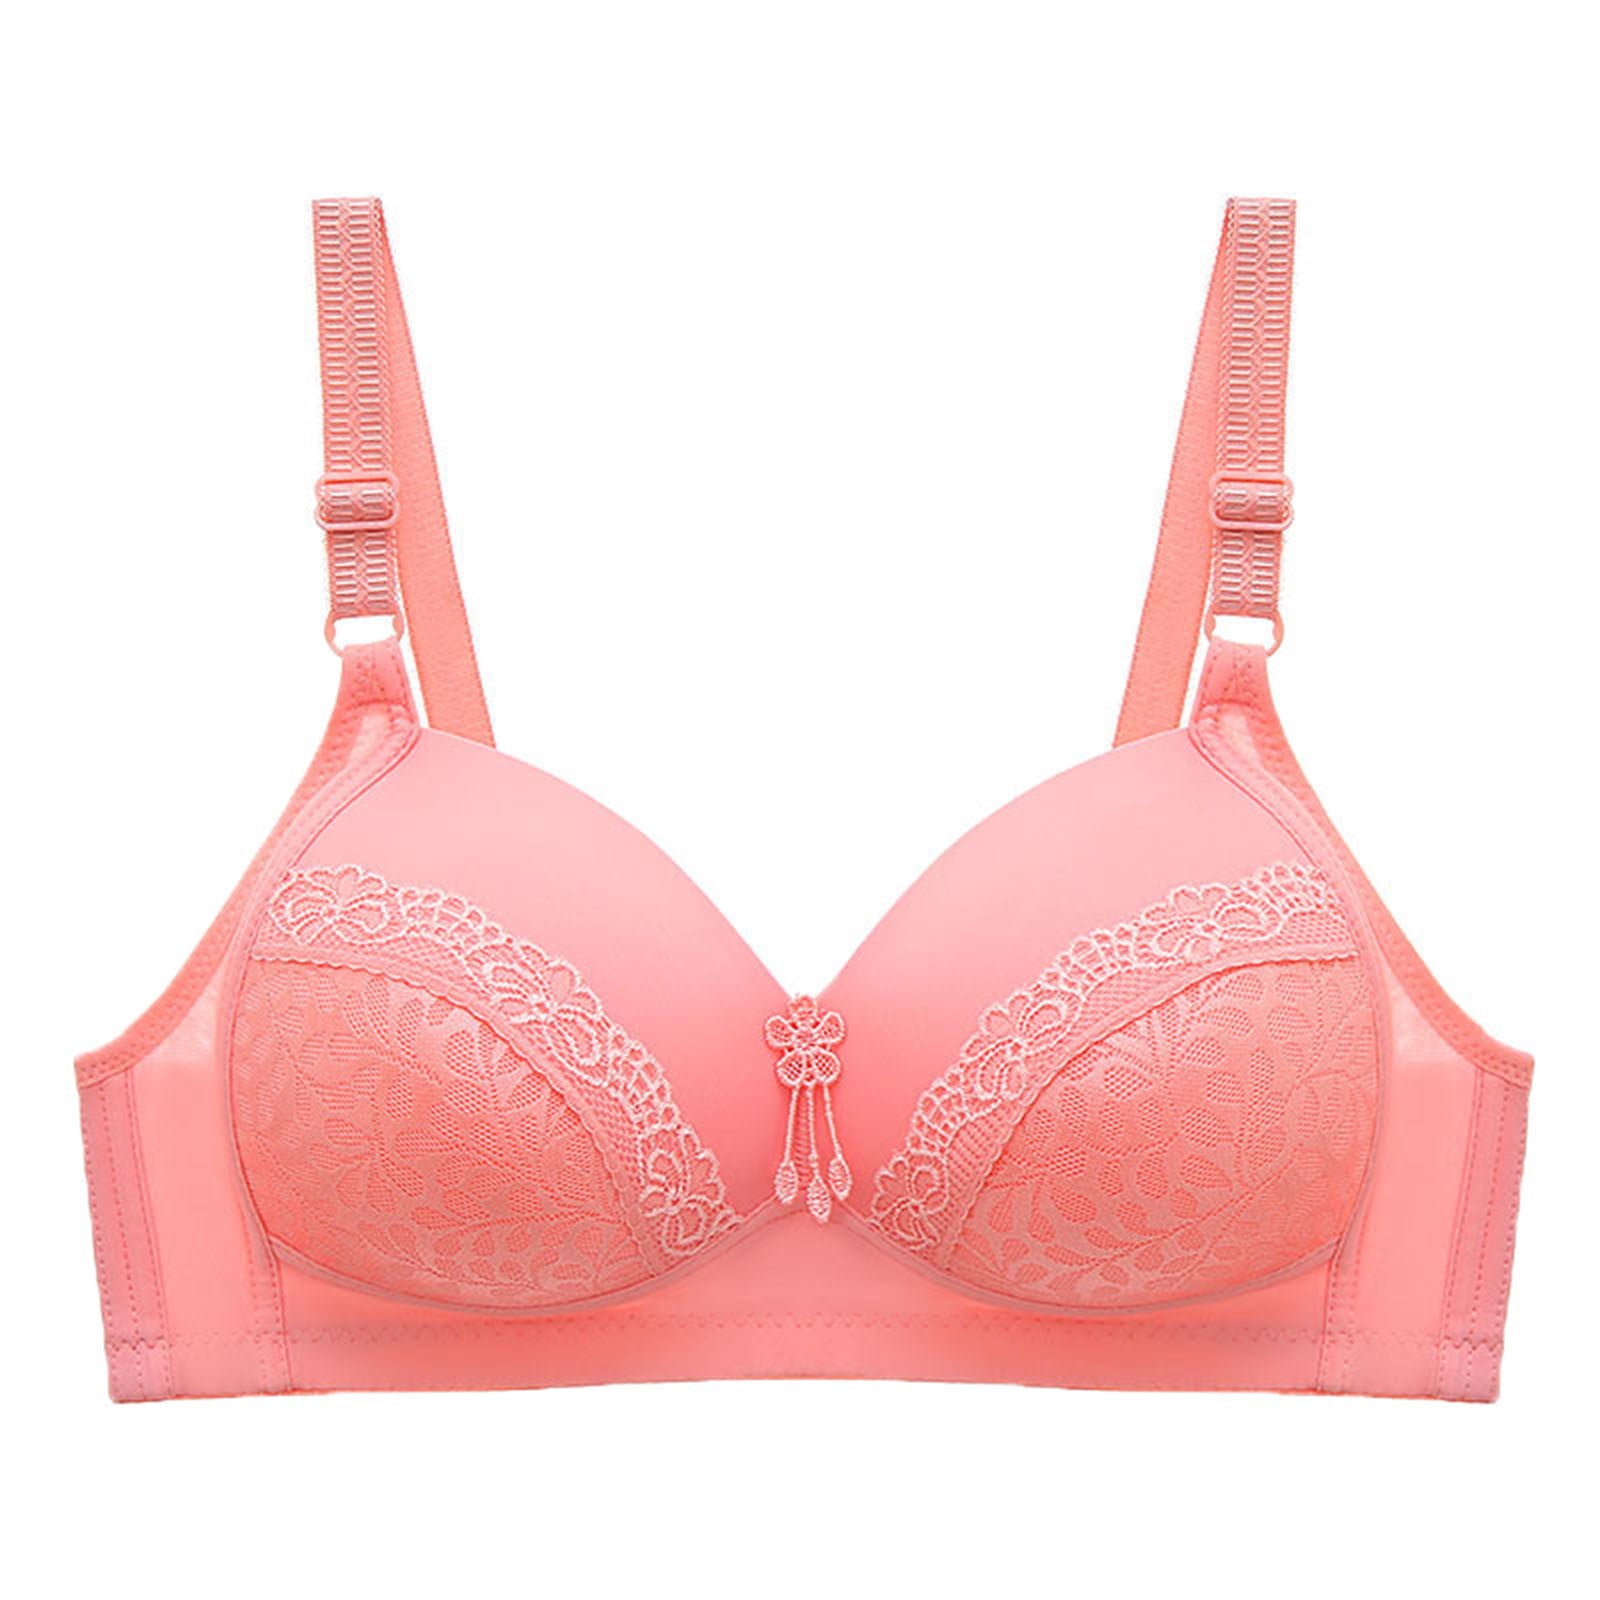 HAPIMO Everyday Bra Wireless for Women Open Front Ultra Light Lingerie  Push-up Comfort Daily Brassiere Underwear Pink M 